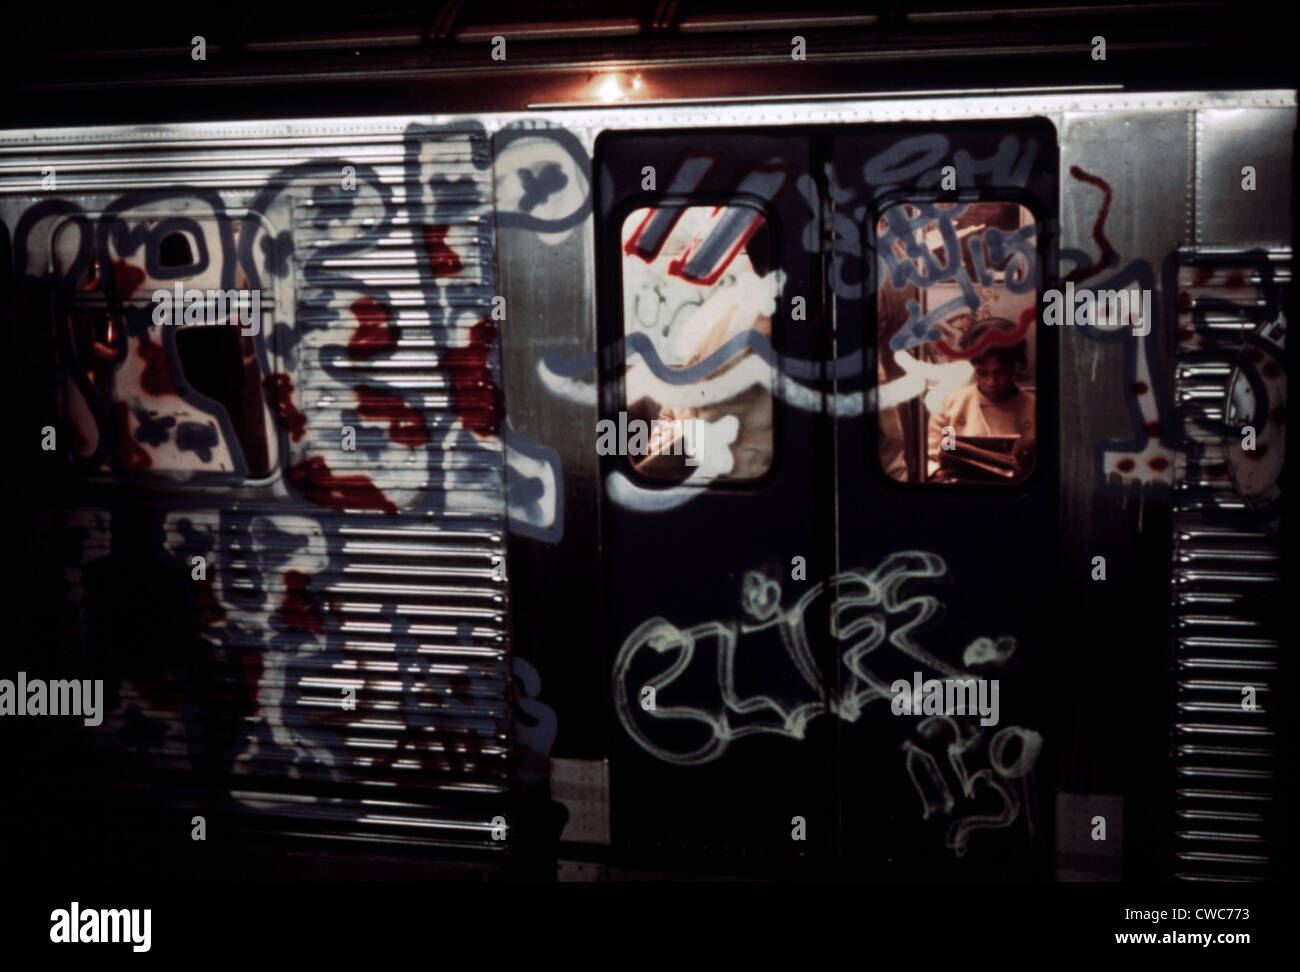 New York City Subway. A subway car with aerosol sprayed paint over in windows and metal of its exterior. New York had a Stock Photo